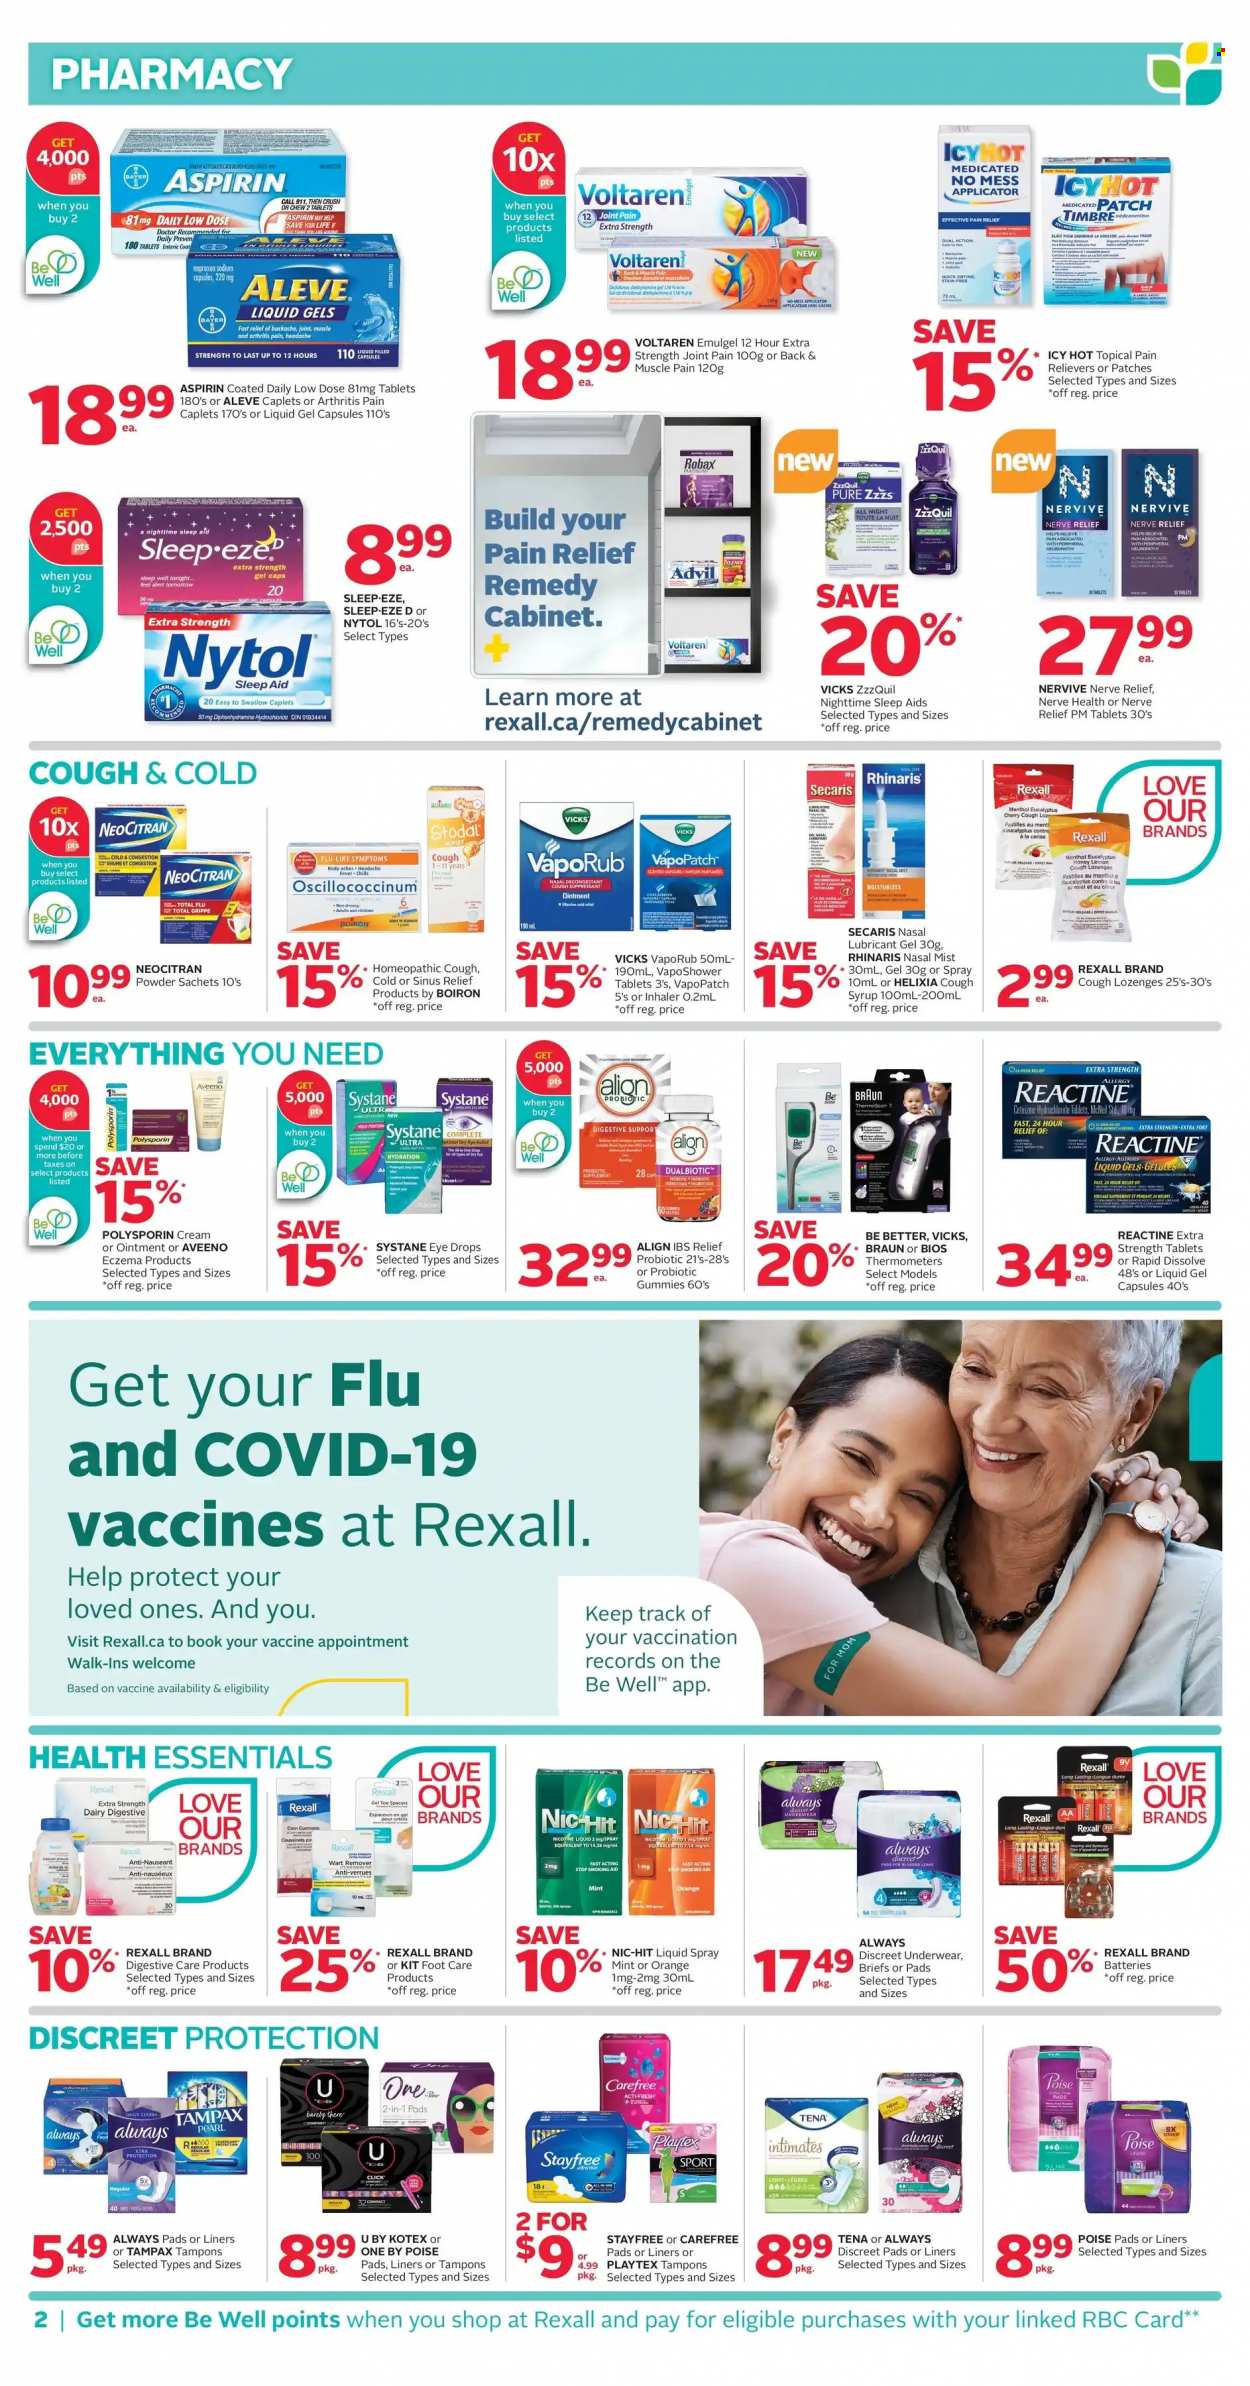 thumbnail - Rexall Flyer - November 25, 2022 - December 01, 2022 - Sales products - pastilles, corn, syrup, Aveeno, ointment, Stayfree, Playtex, Always pads, sanitary pads, Always Discreet, Carefree, Kotex, tampons, lubricant, Vicks, foot care, pan, battery, pendant, pain relief, Aleve, ZzzQuil, Advil Rapid, VapoRub, Low Dose, aspirin, Oscillococcinum, Boiron, Bayer, Braun, Systane, Tampax. Page 2.